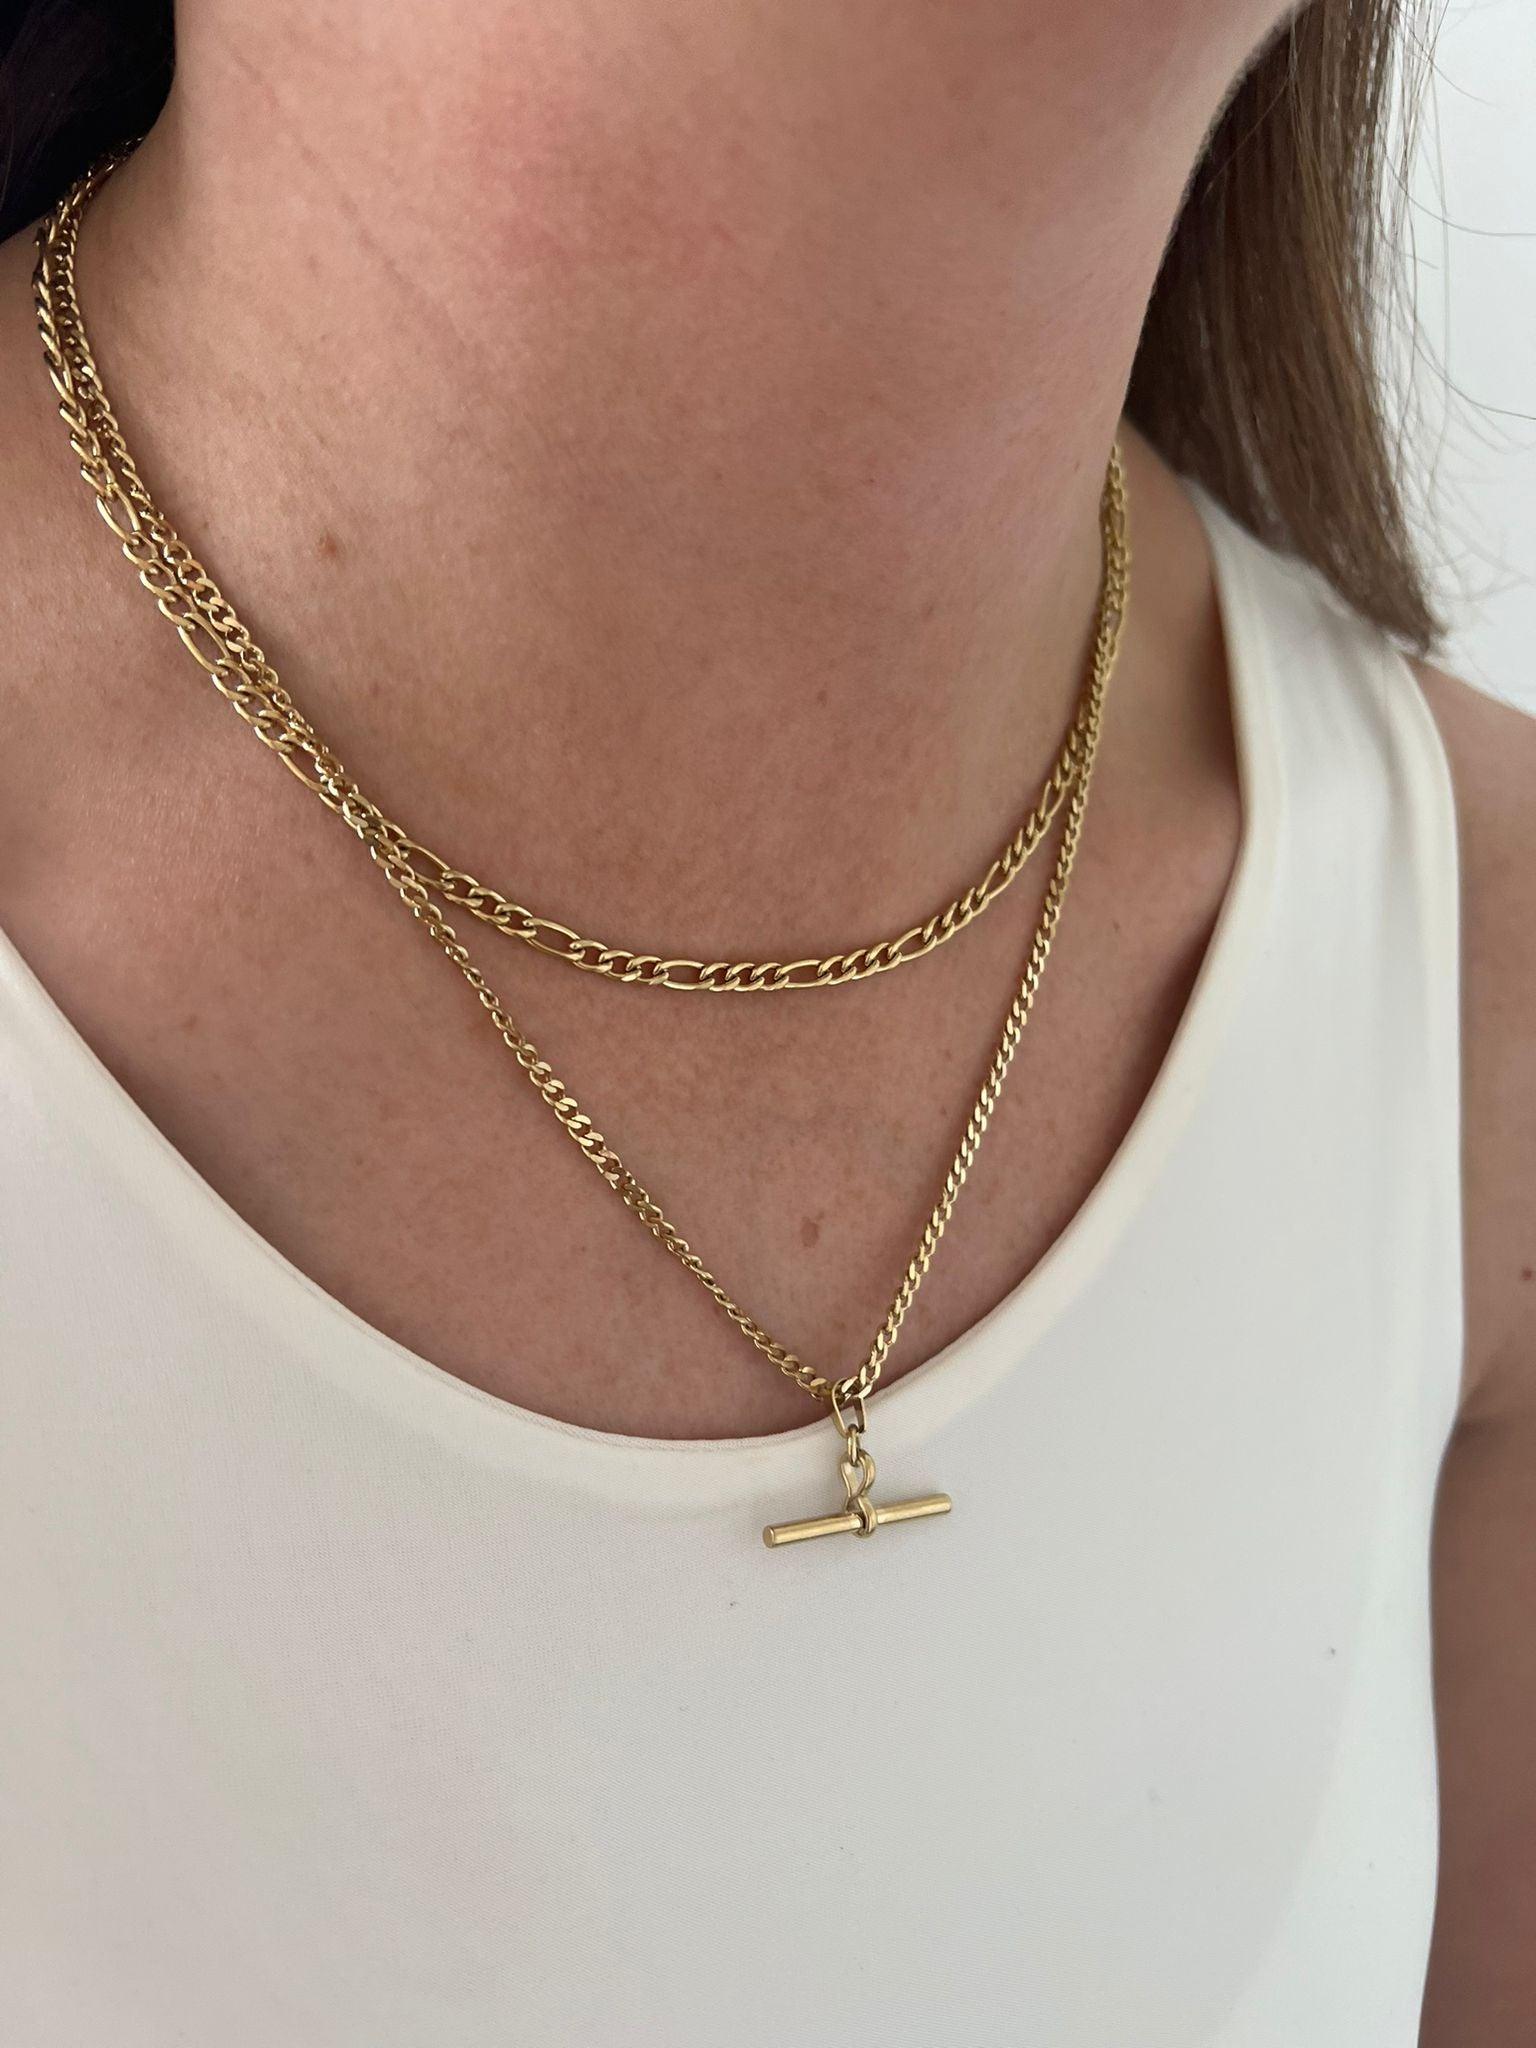 Silver T Bar Chain Necklace | Paperclip Chain Necklace | Statement Necklace  – KookyTwo